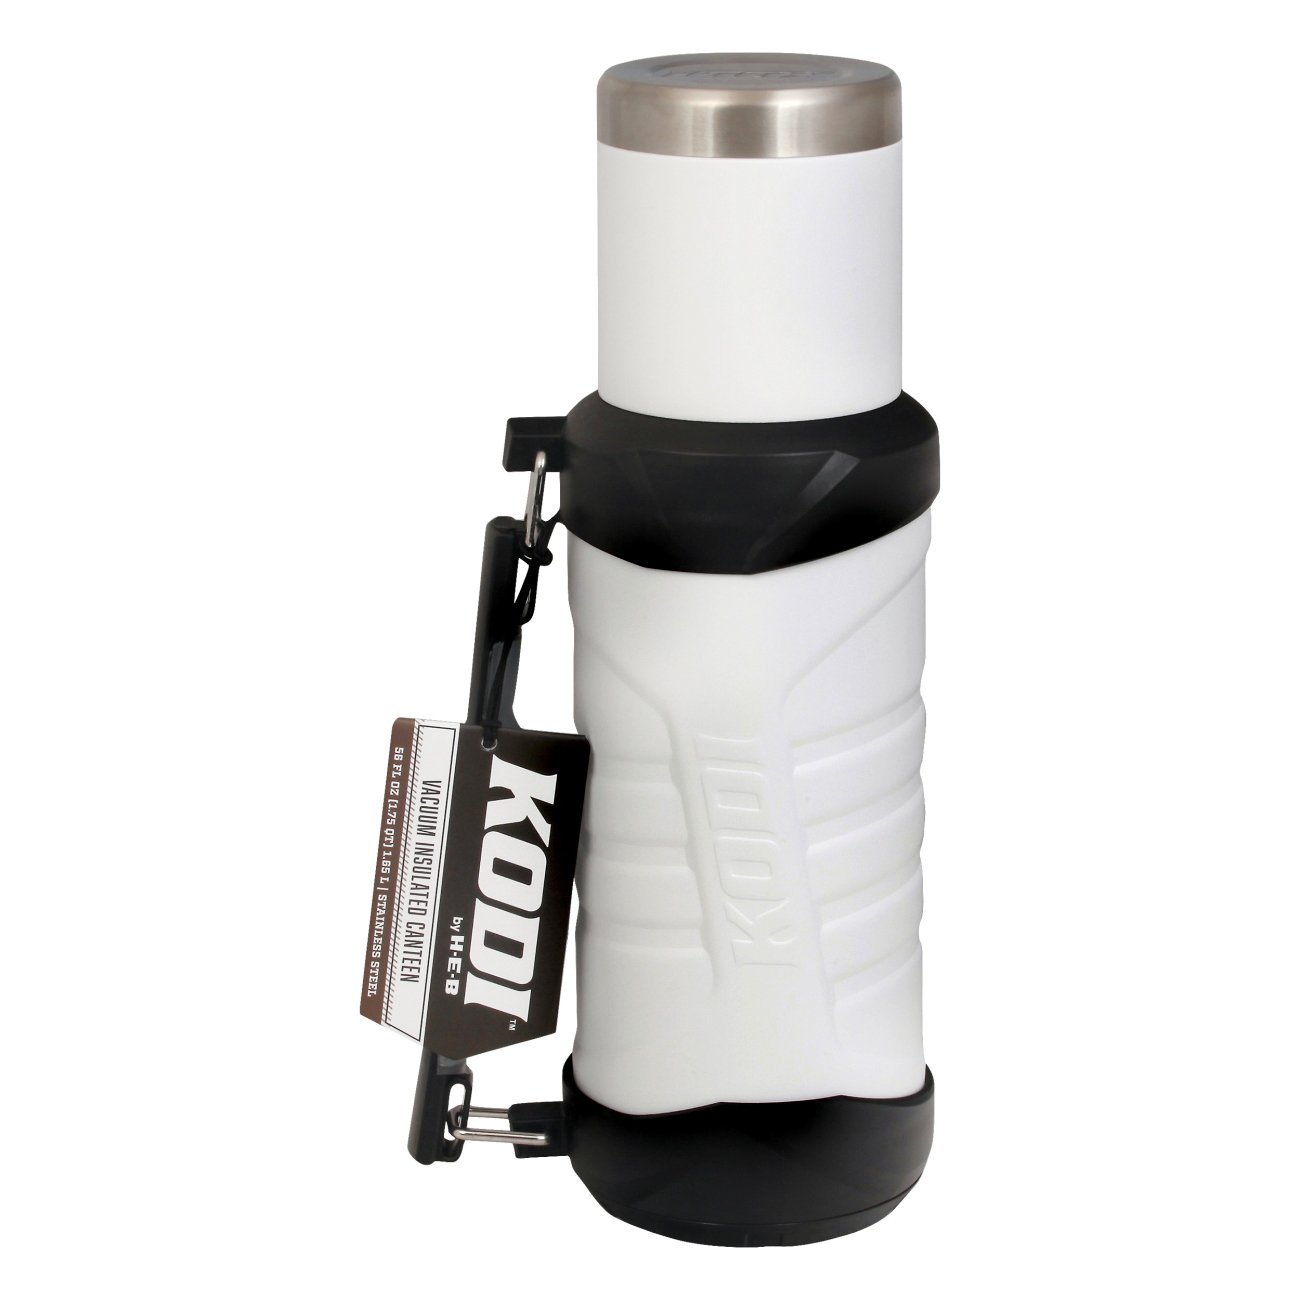 KODI by H-E-B Stainless Steel Water Bottle - Matte White - Shop Travel &  To-Go at H-E-B